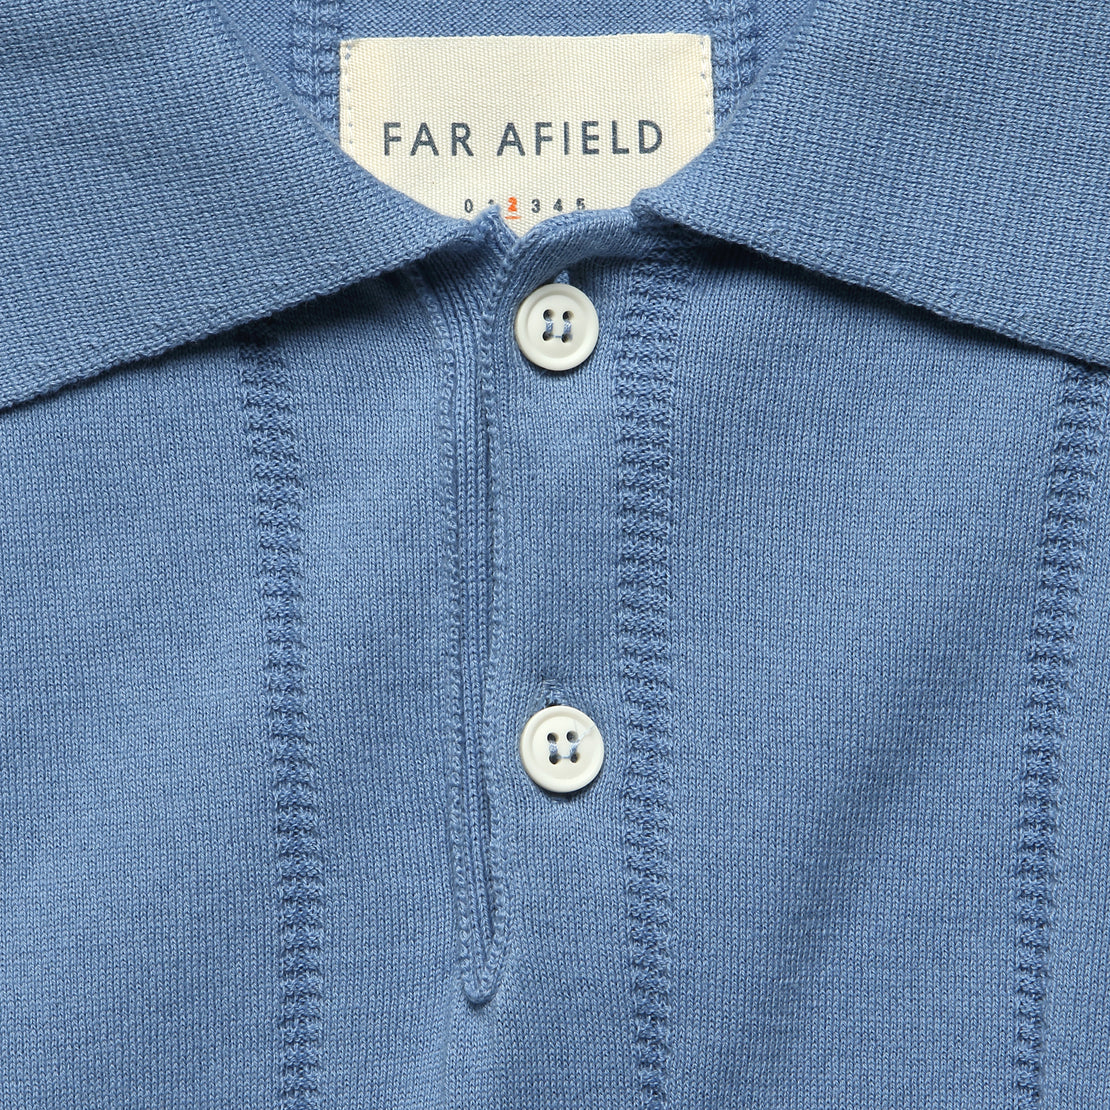 Knit Jacobs Polo - Allure Blue - Far Afield - STAG Provisions - Tops - S/S Knit